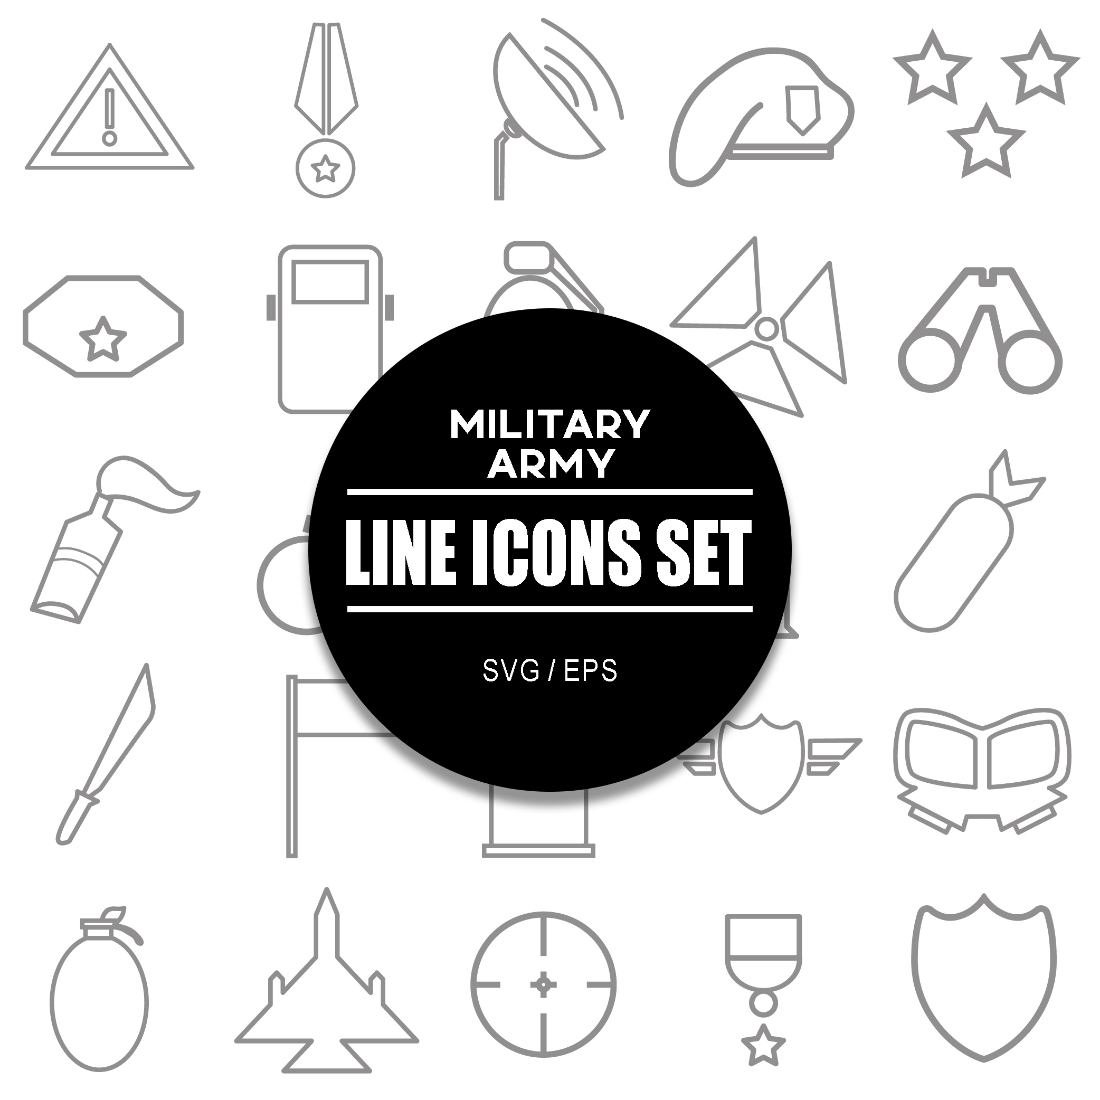 Military Army Icon Set cover image.